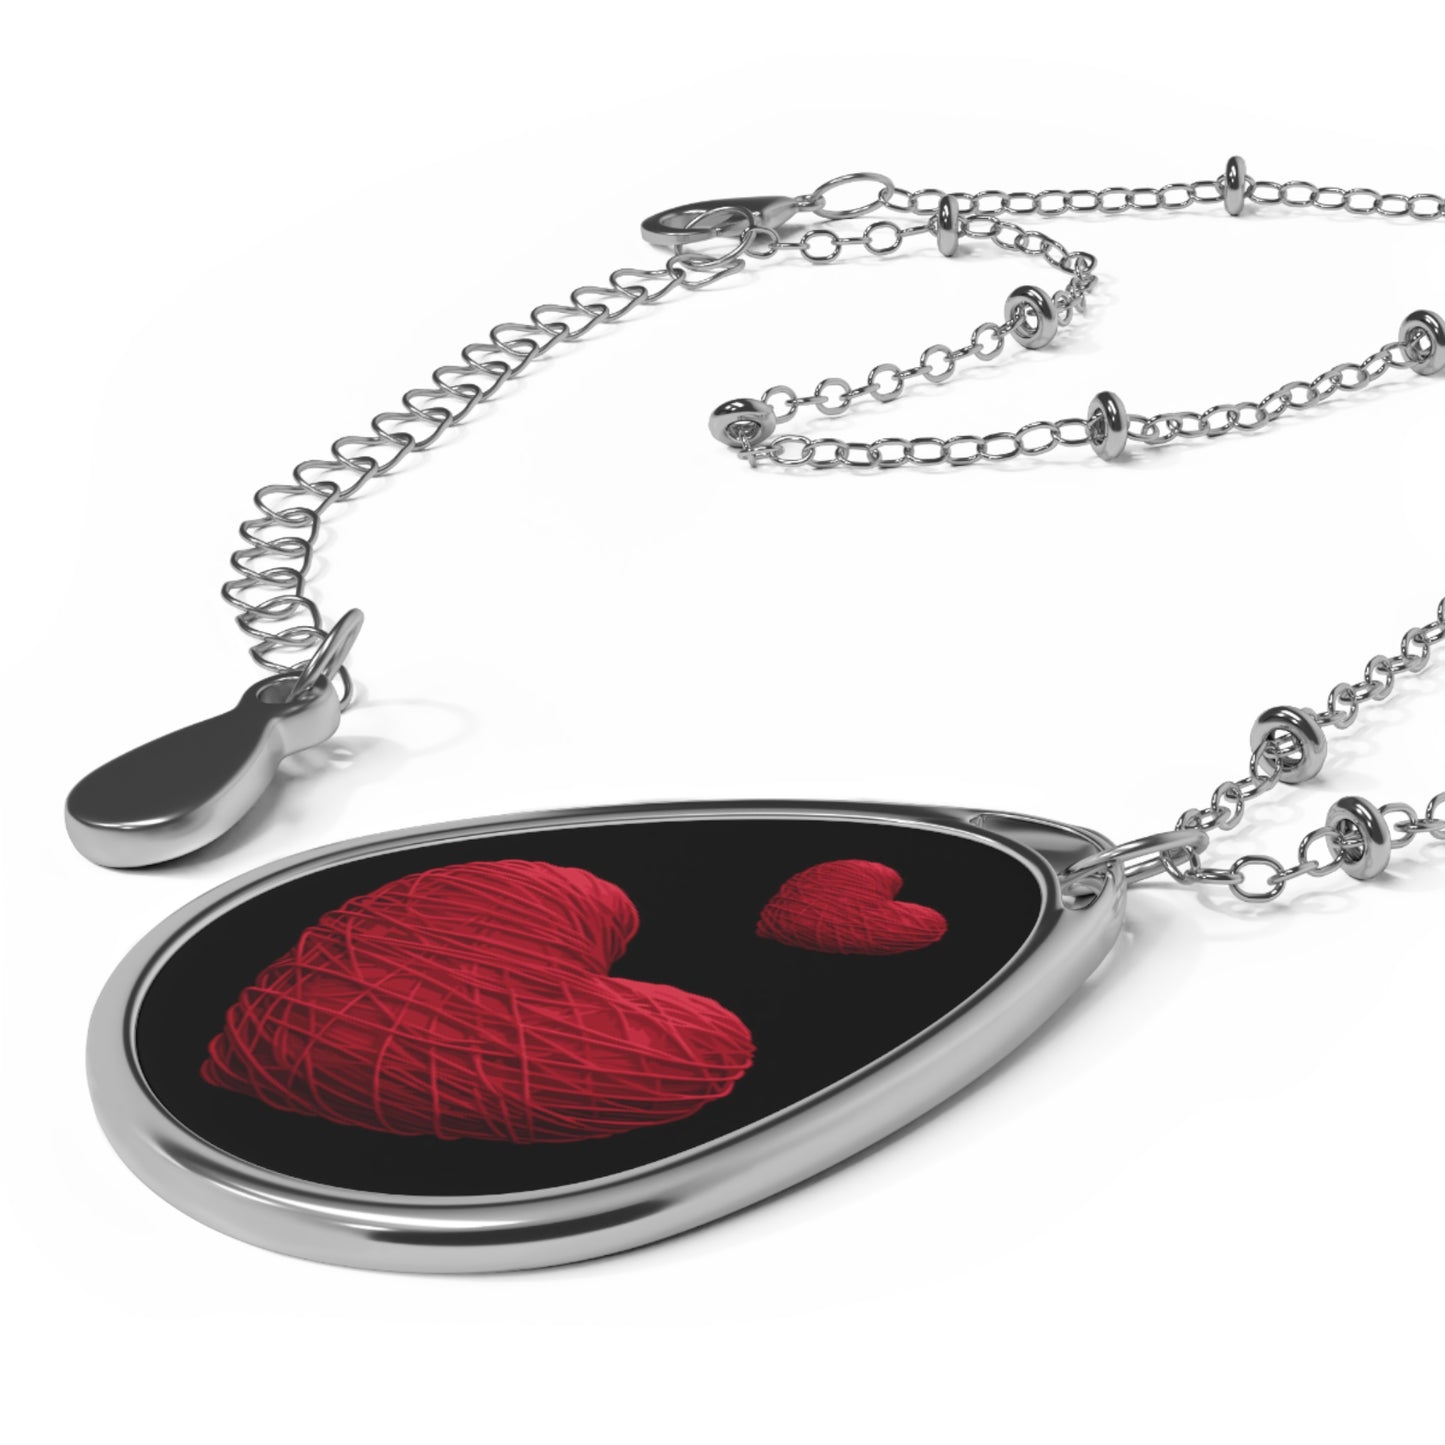 Valentine's Day, Red heart shape design Oval Necklace